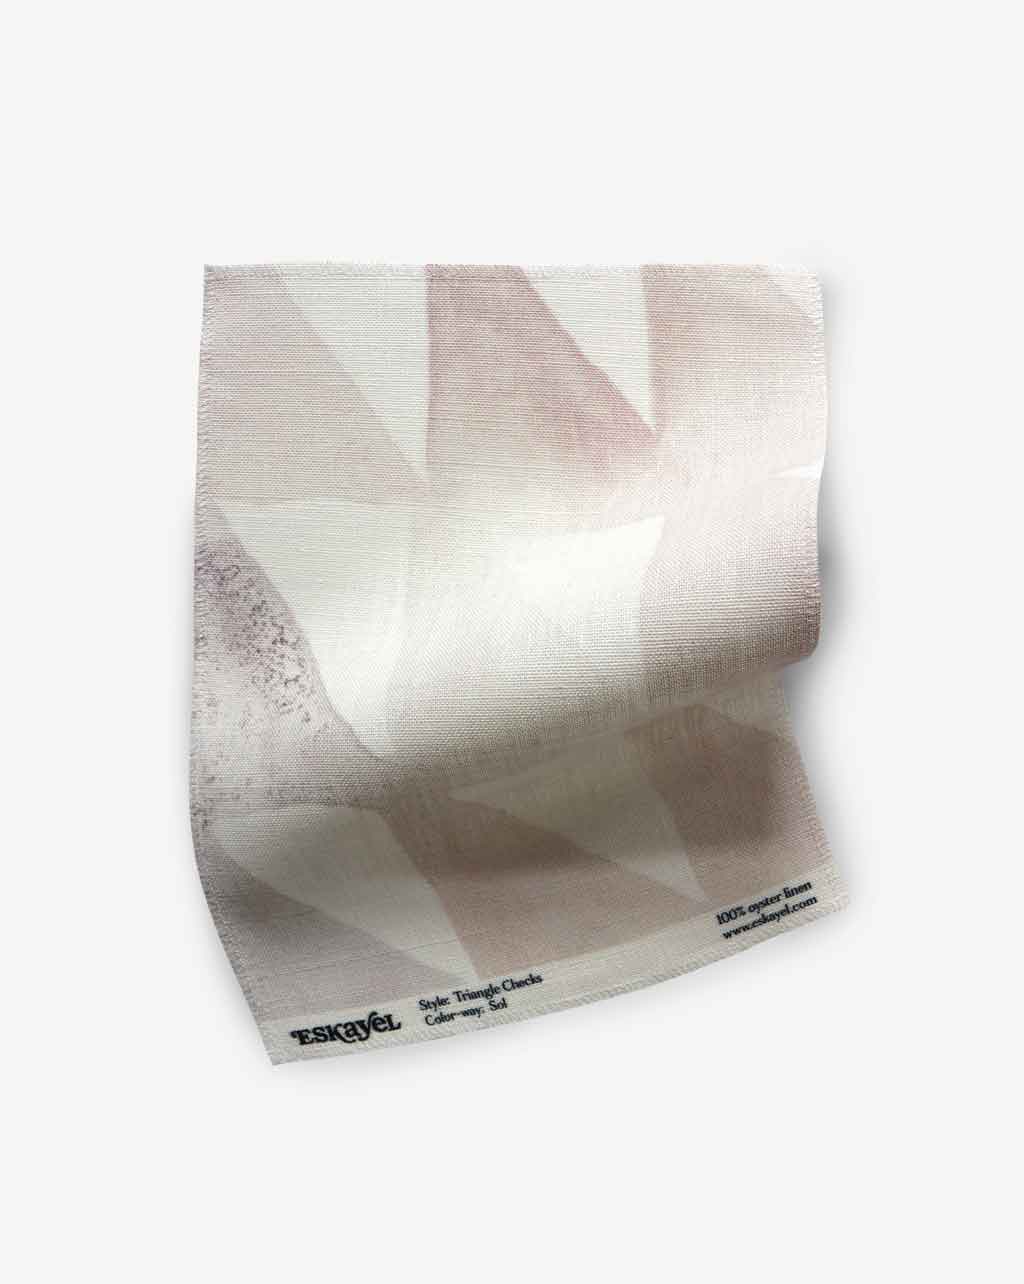 A piece of Triangle Checks Fabric Sol with a triangle checks pattern on it